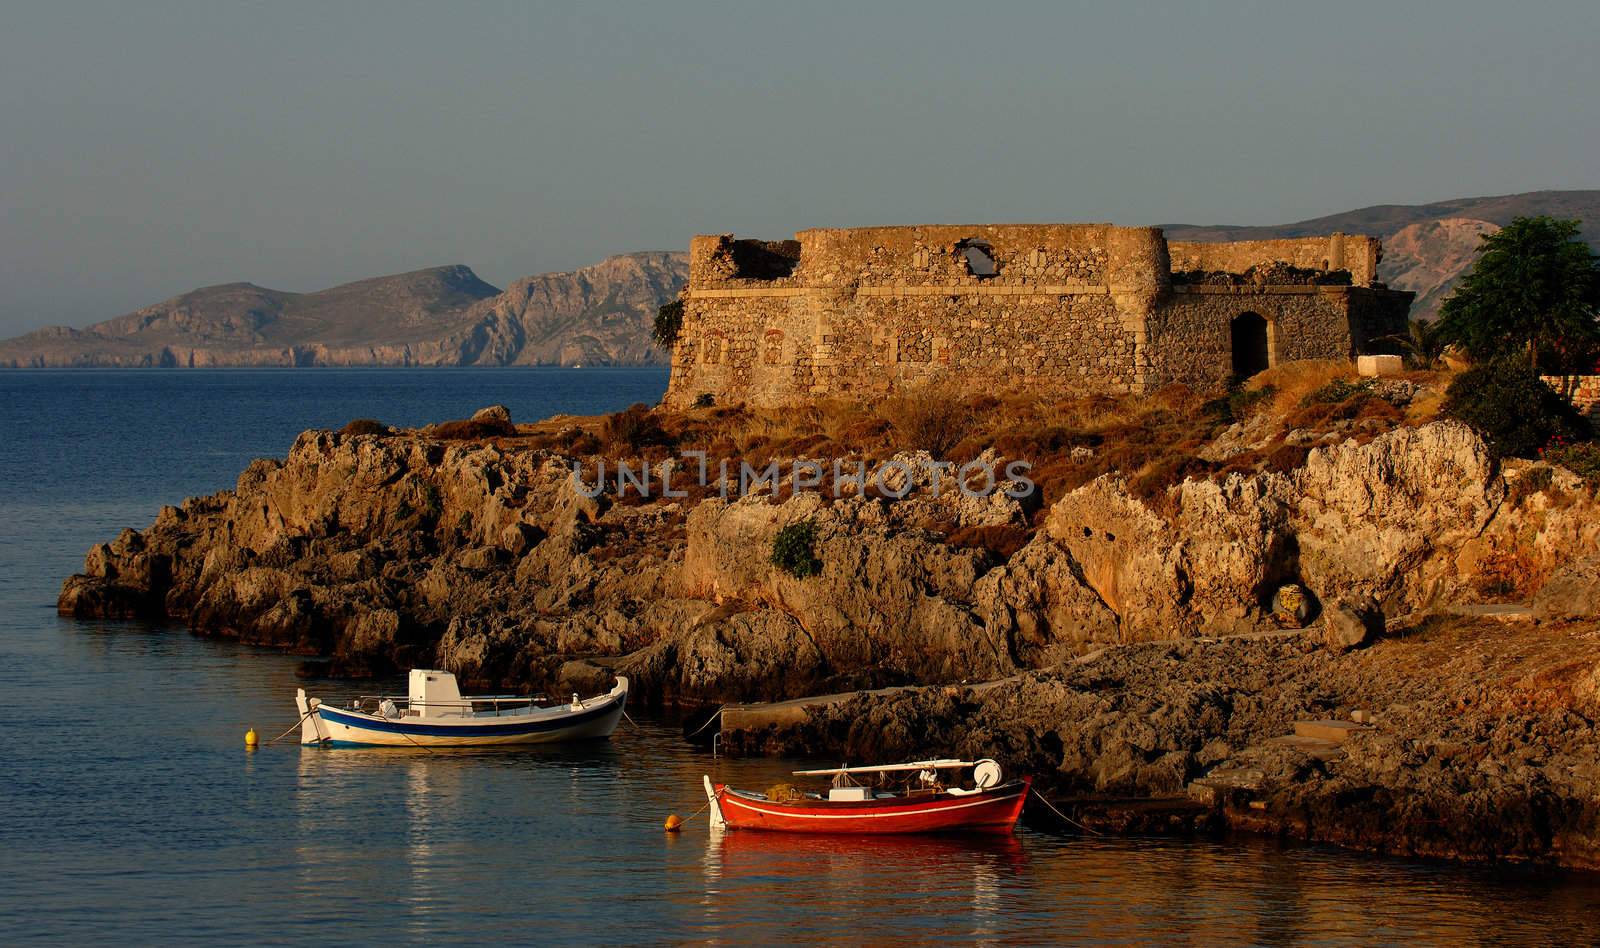 Image shows an old small castle on the island of Kithira, Greece